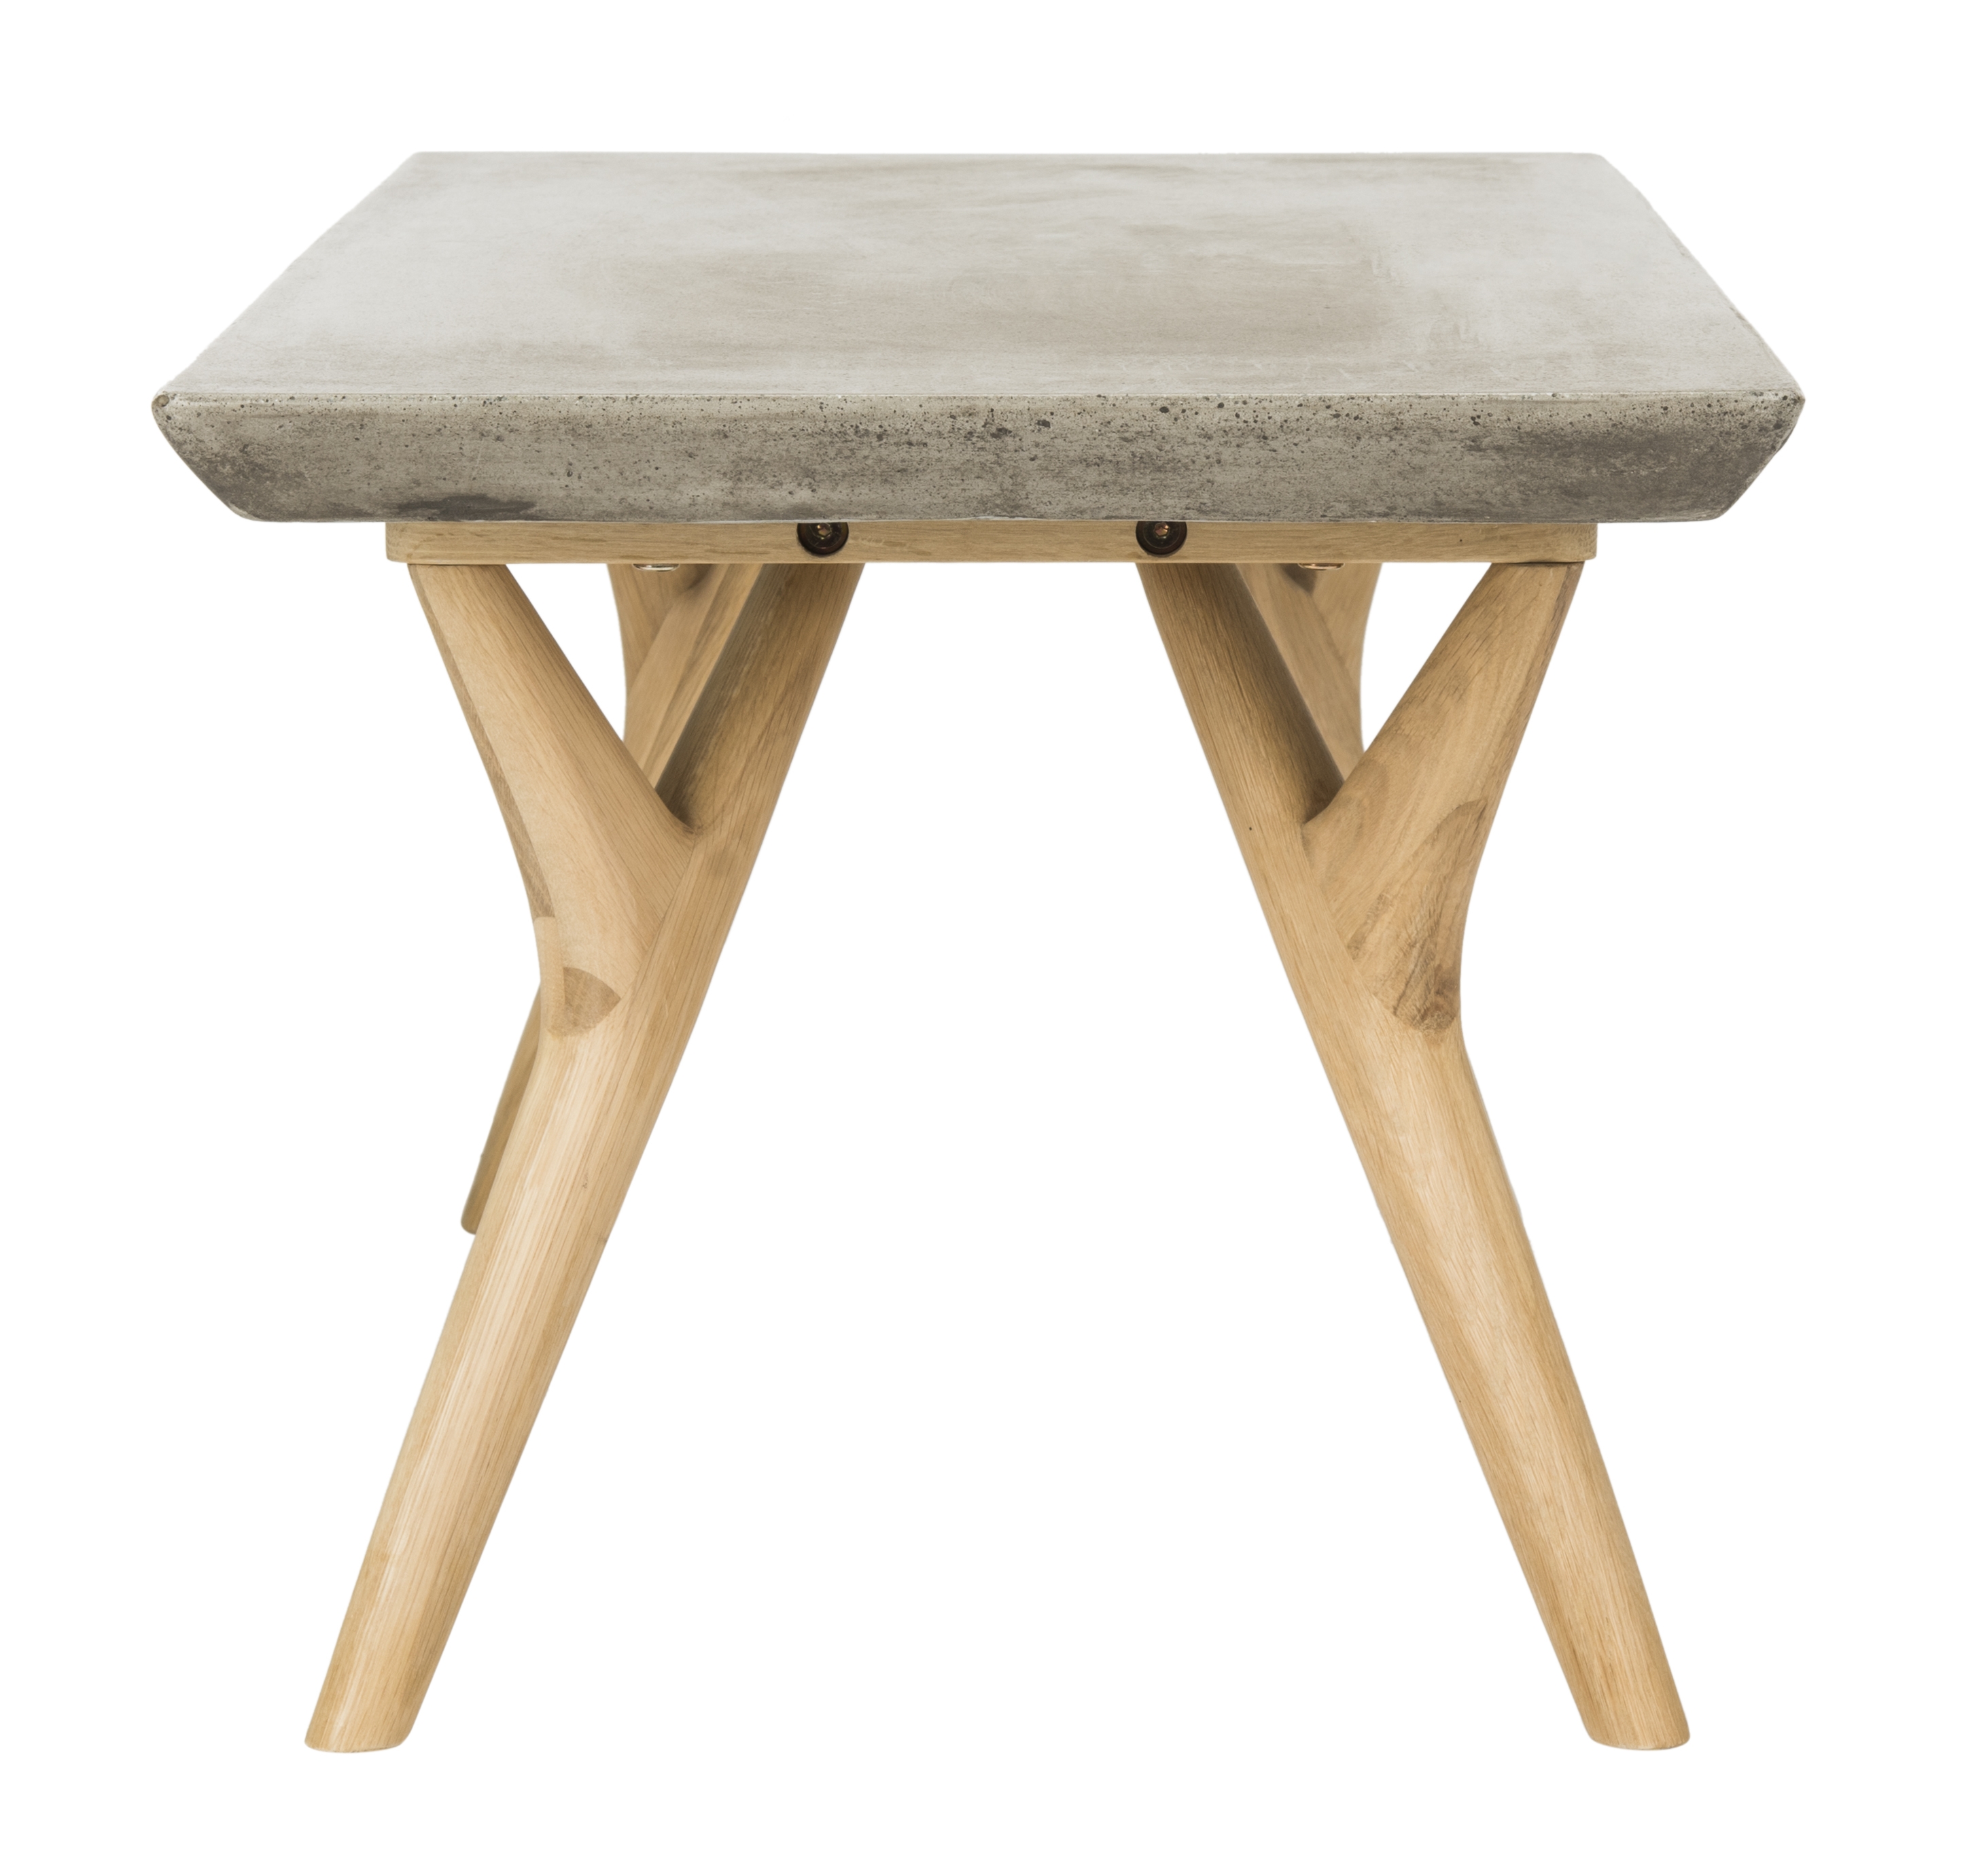 Greger Coffee Table - Image 2